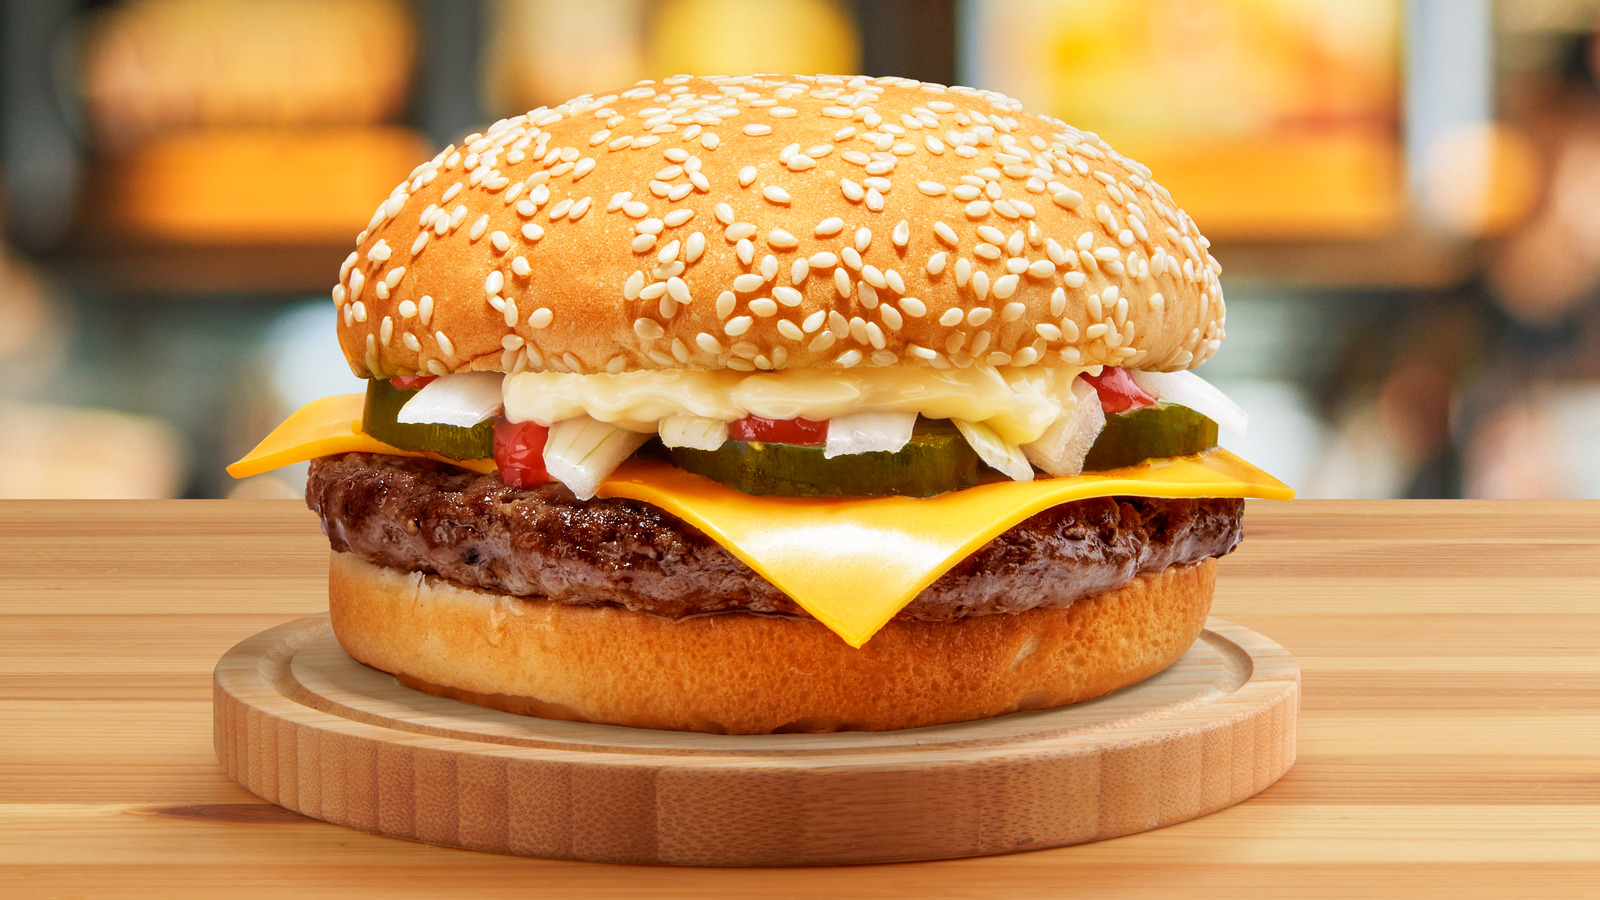 How do canned cheeseburgers actually work?